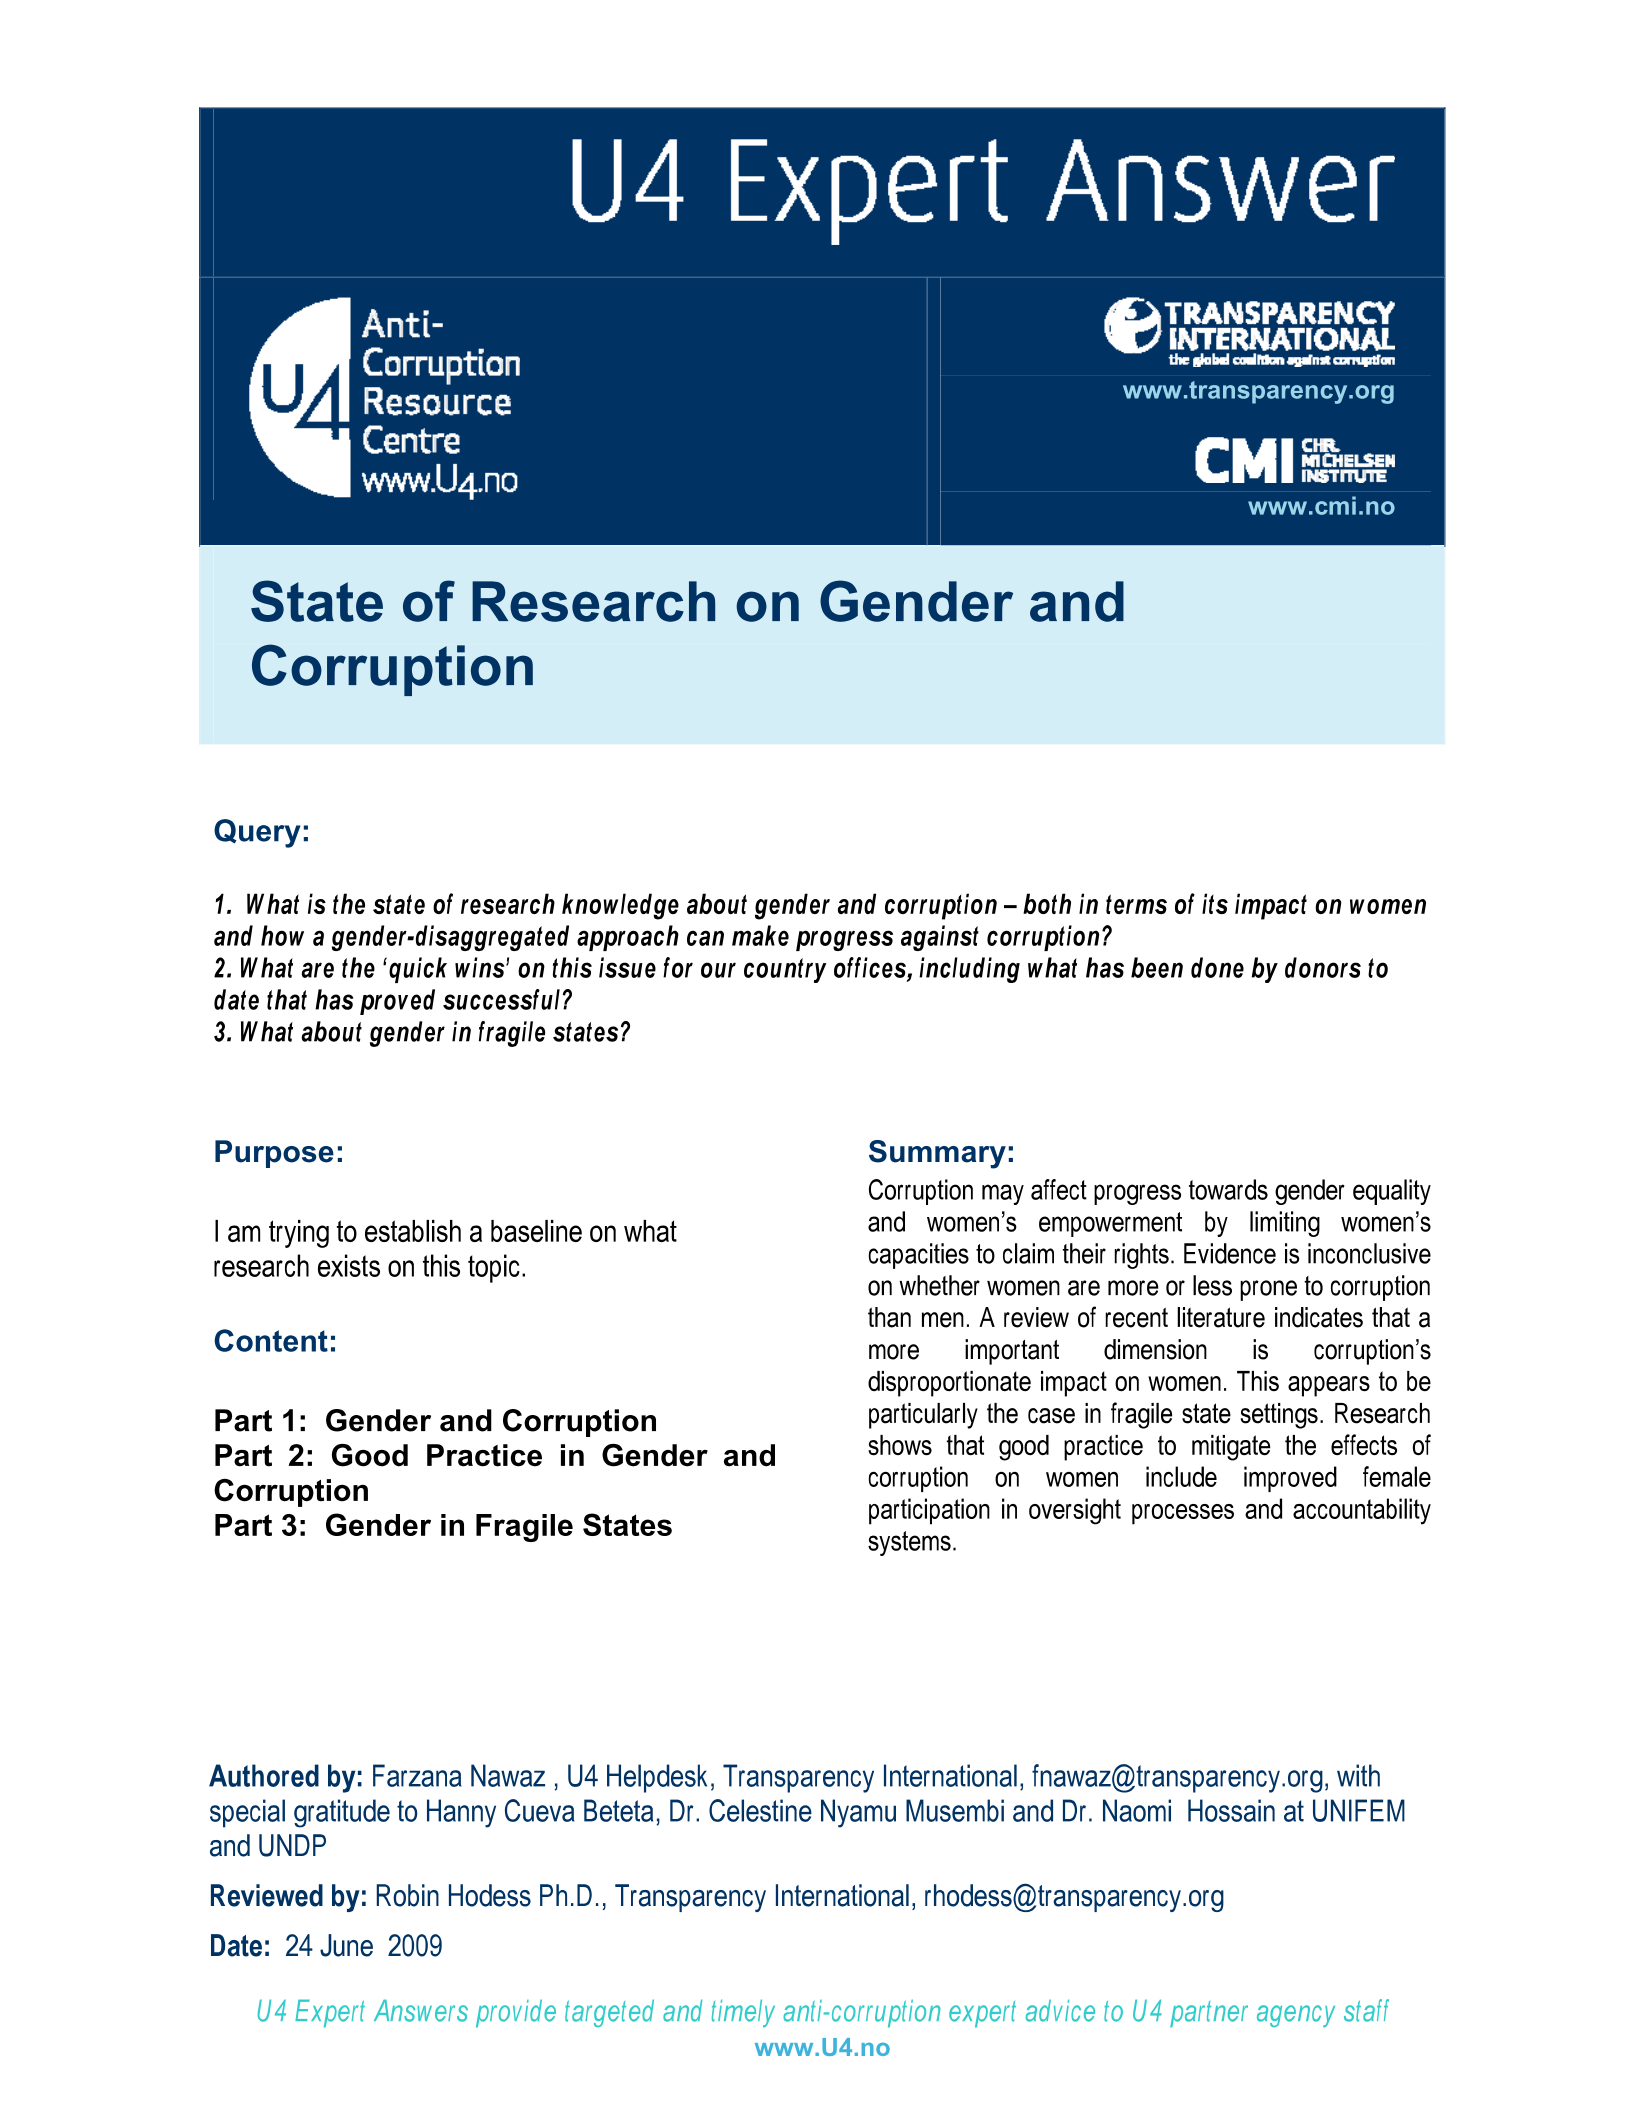 State of research on gender and corruption